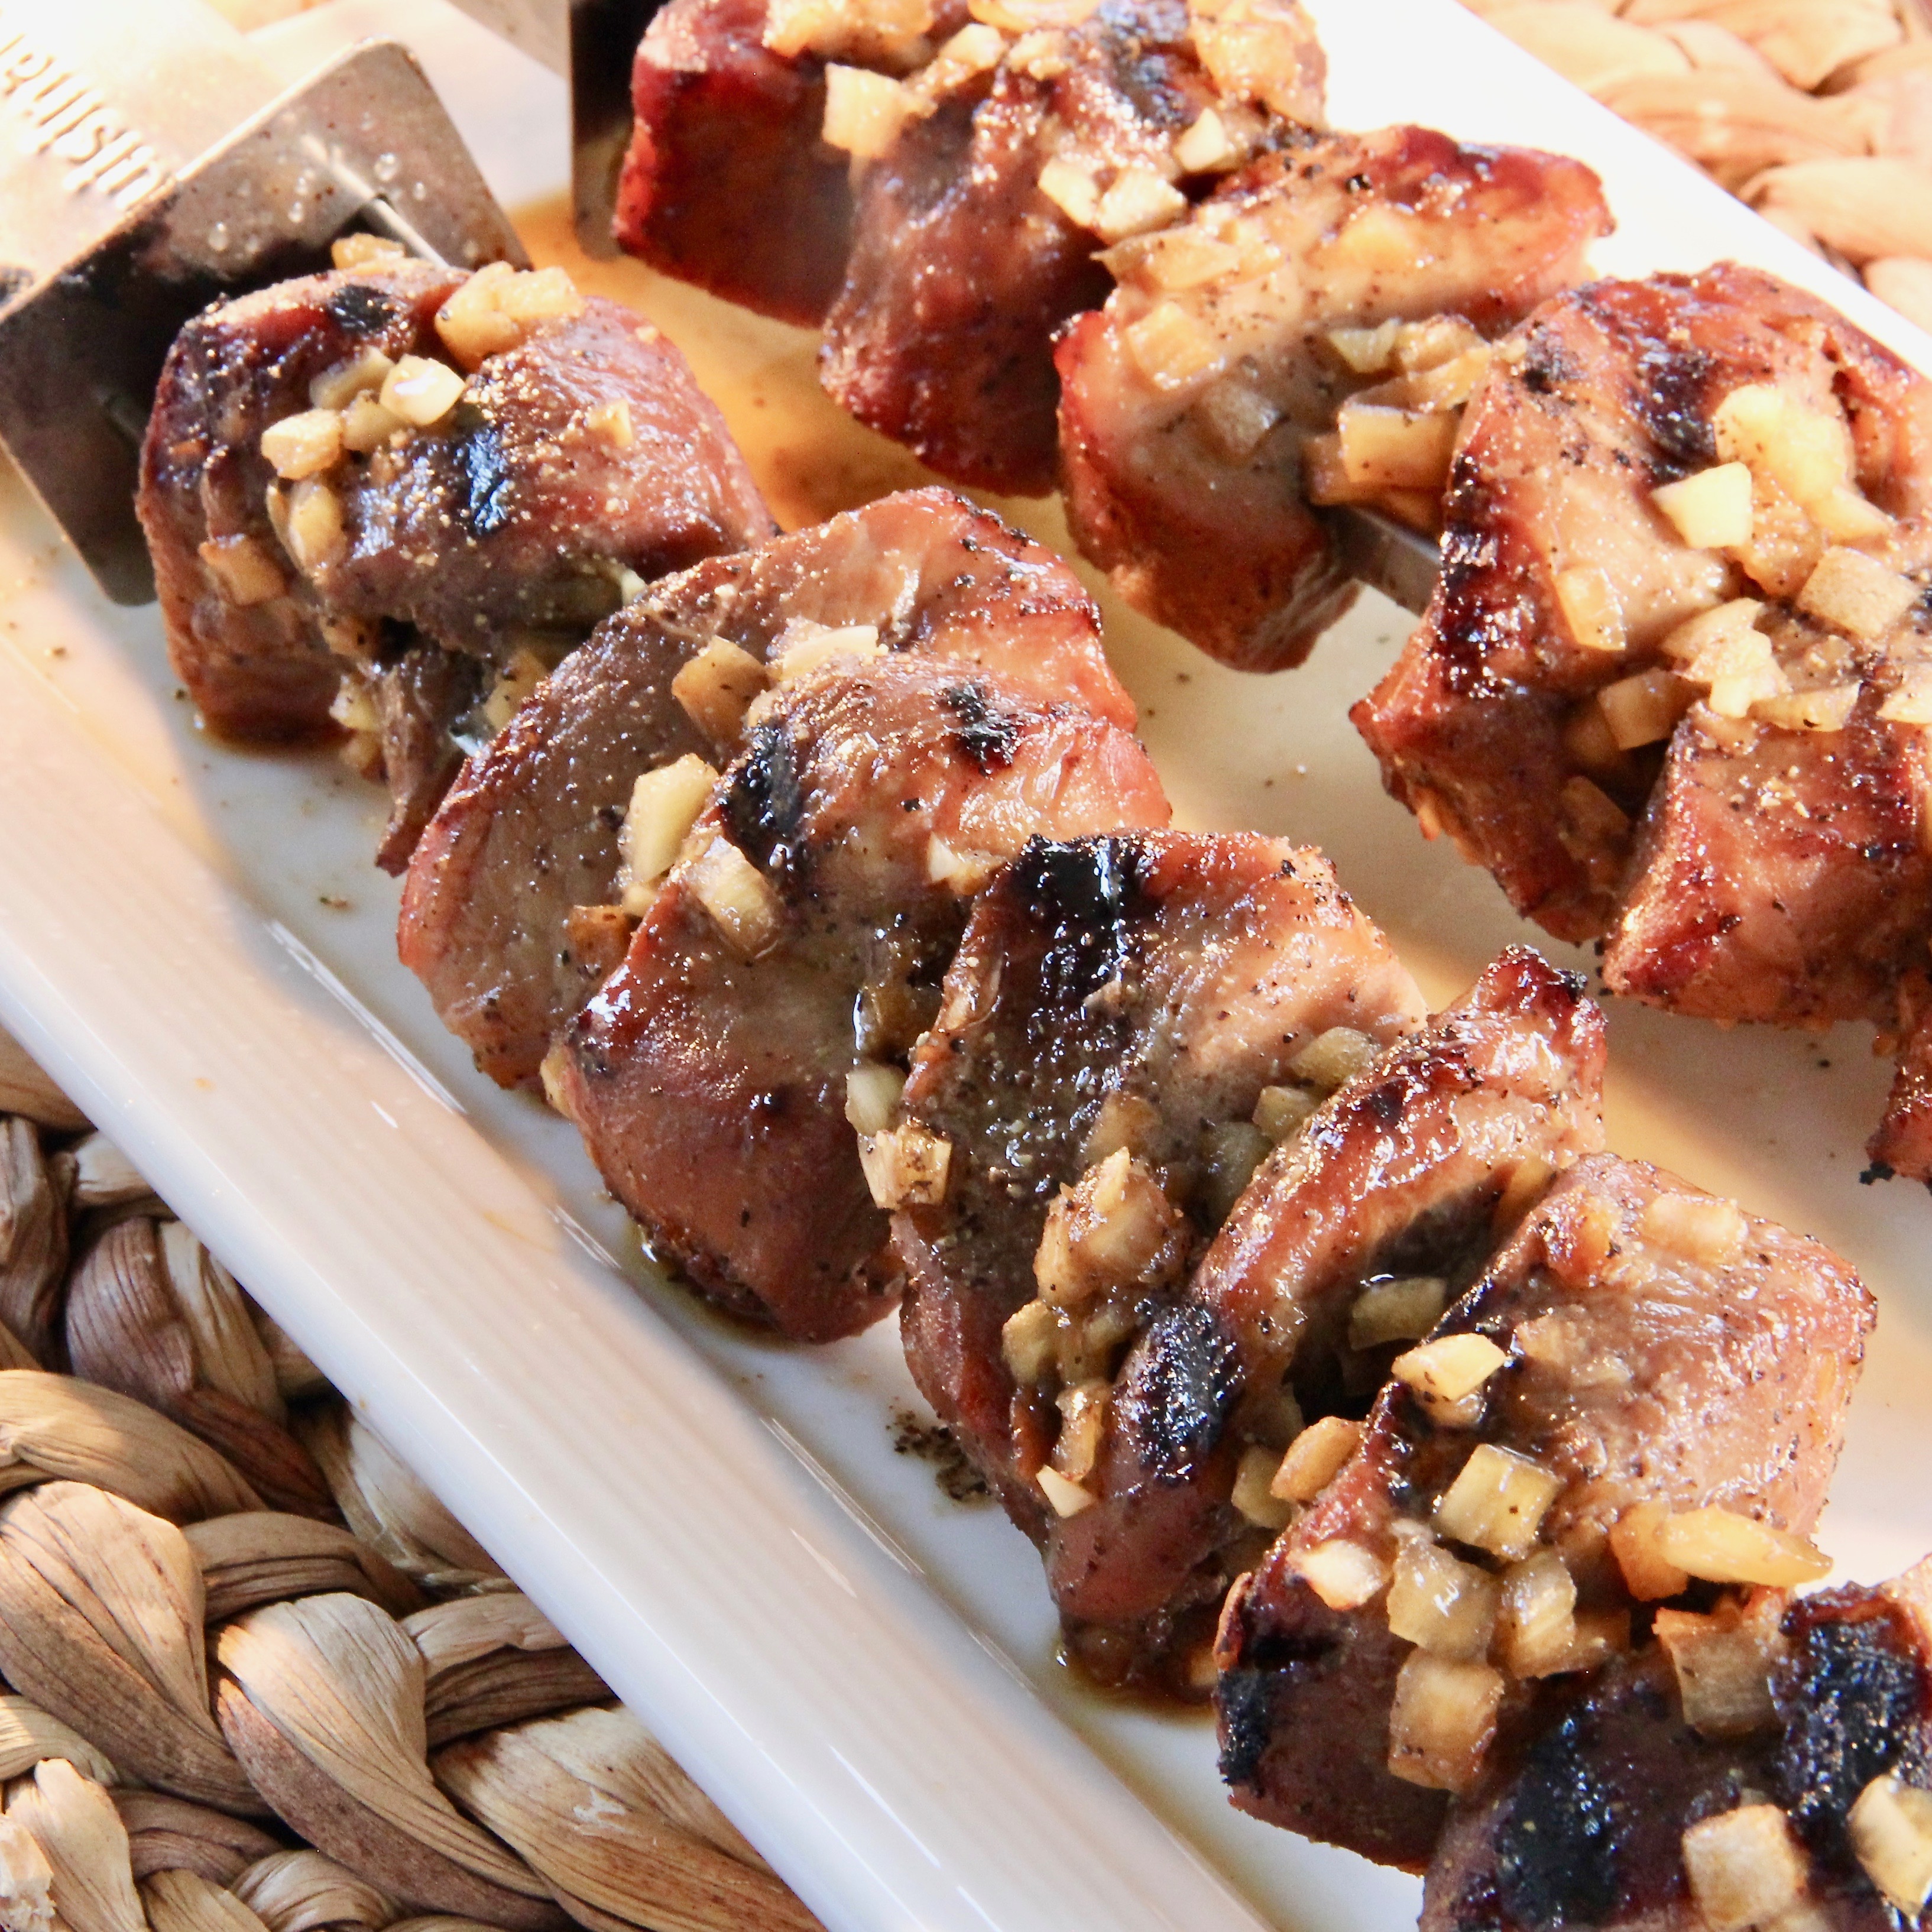 These Filipino pork kebabs are marinated in a tangy mixture of sugar, soy sauce, onion, garlic and black pepper. "Very tasty, extremely tender and moist," says csshilling. "I alternated with pineapple on the skewer. Will definitely make again."
                          